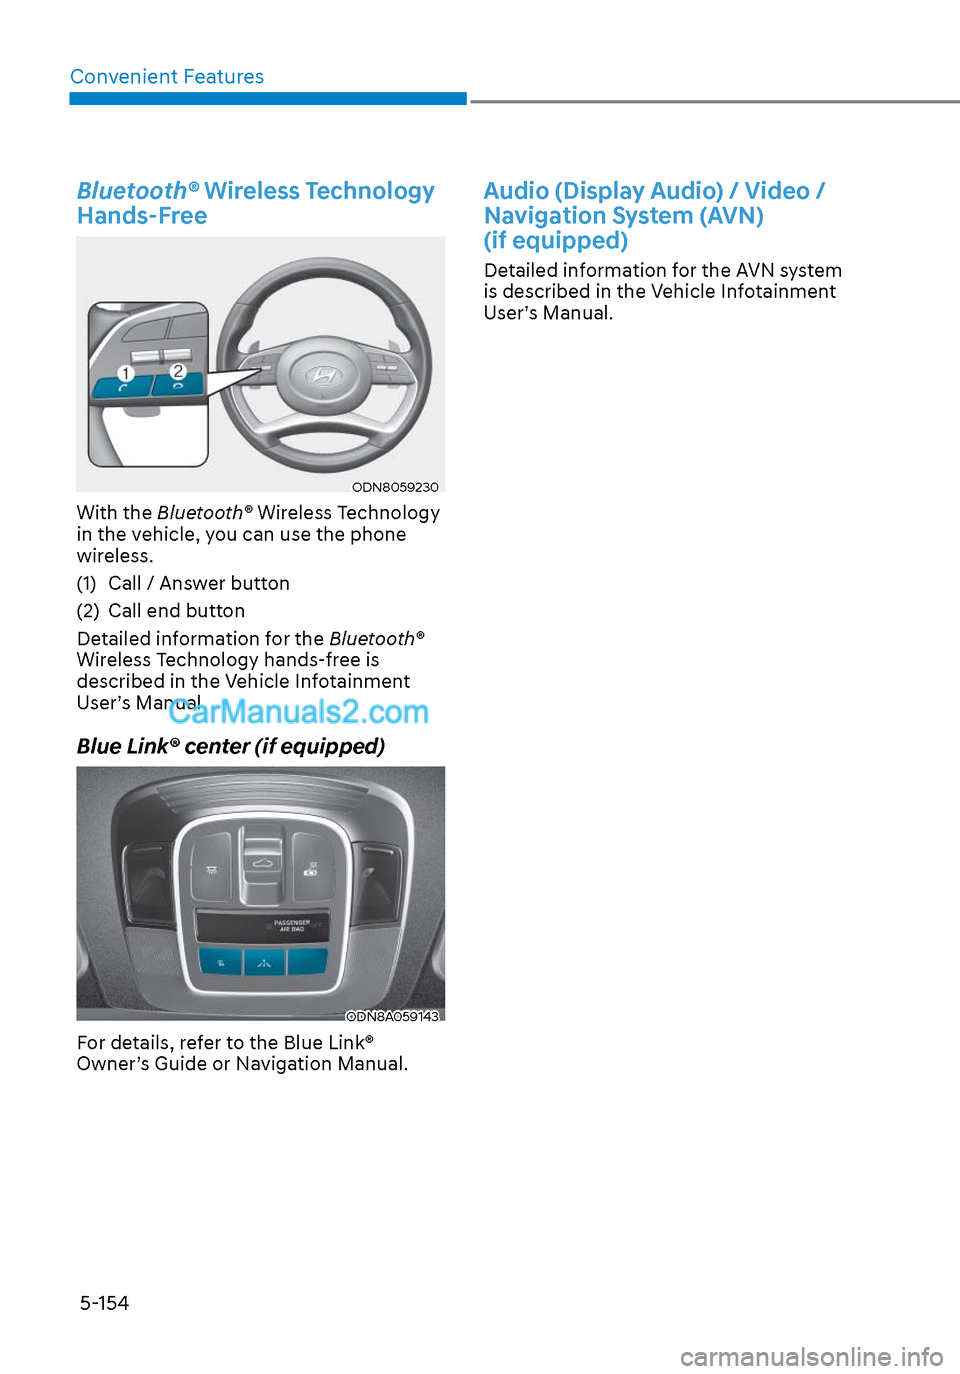 Hyundai Sonata 2020  Owners Manual Convenient Features5-154
Bluetooth® Wireless Technology 
Hands-Free
ODN8059230ODN8059230
With the Bluetooth® Wireless Technology 
in the vehicle, you can use the phone 
wireless.
(1)  Call / Answer 